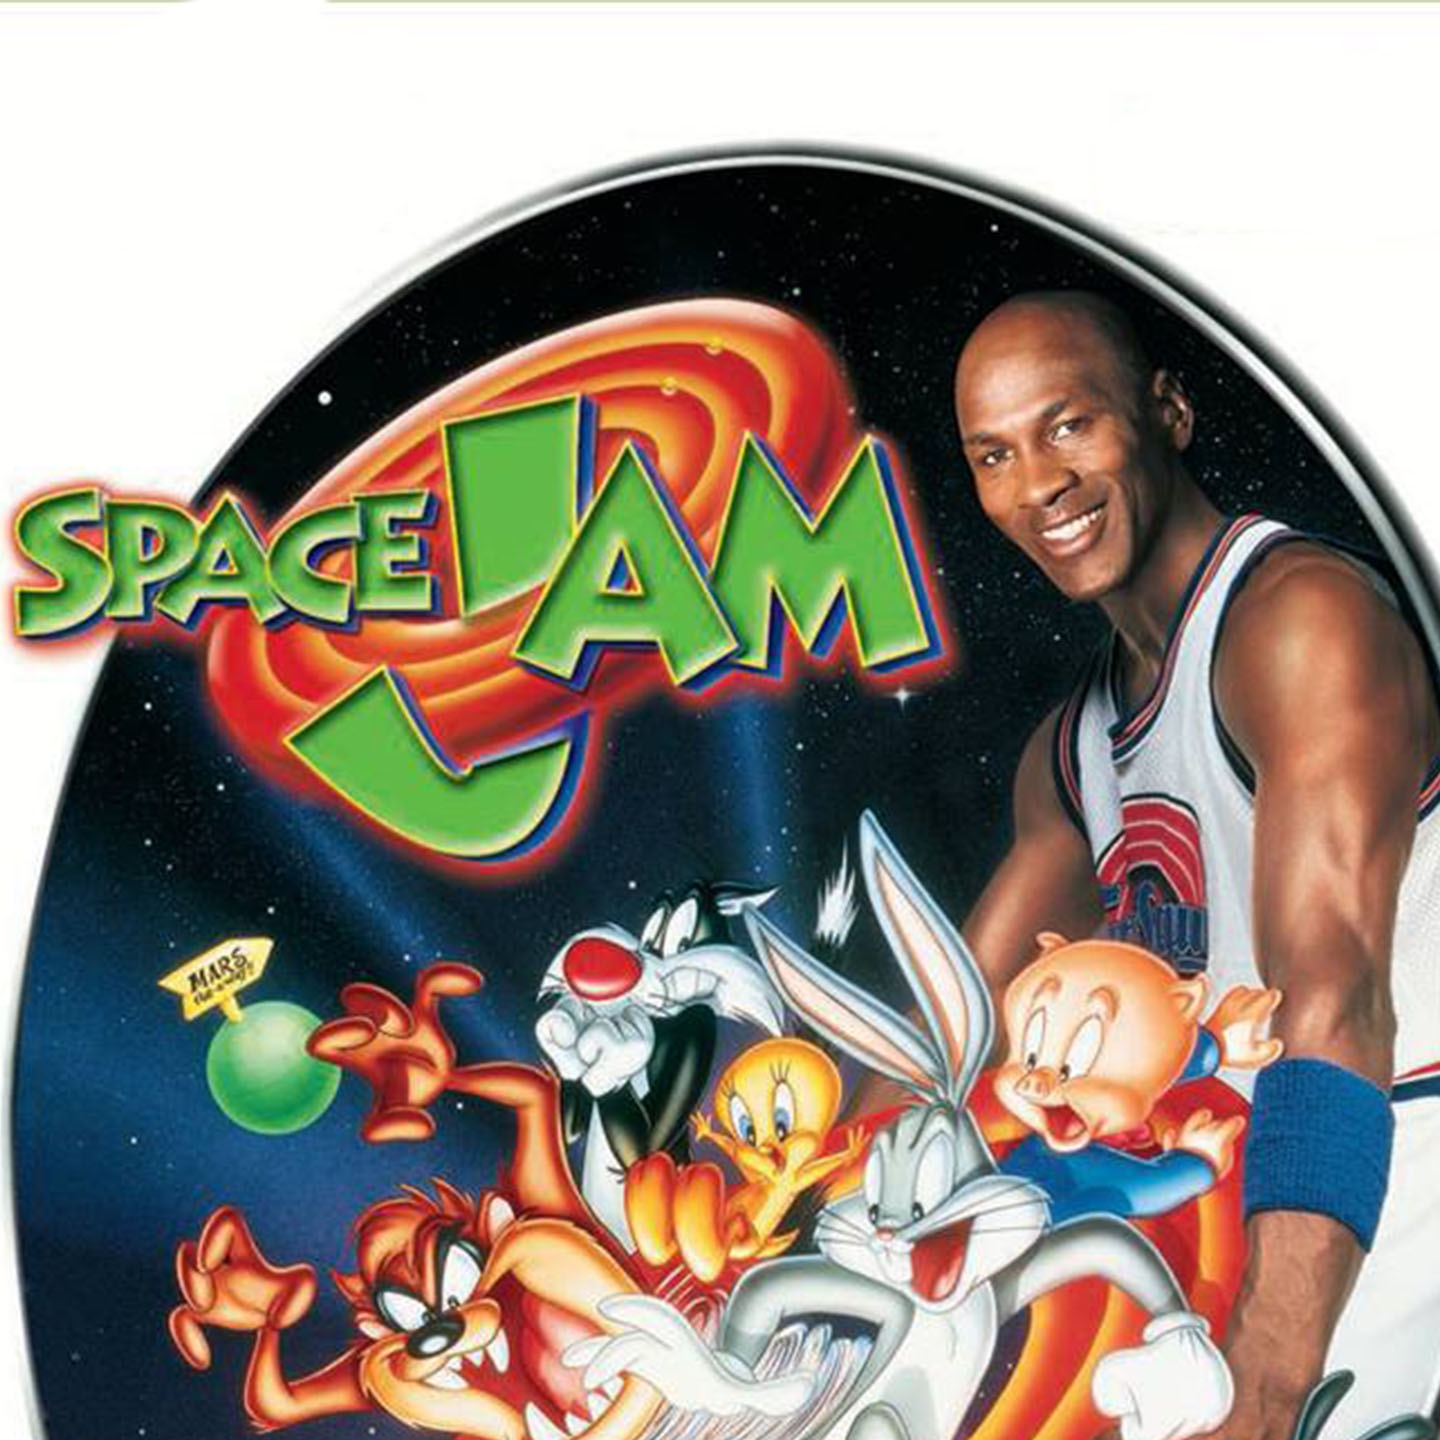 I Believe I Can Fly (From "Space Jam")